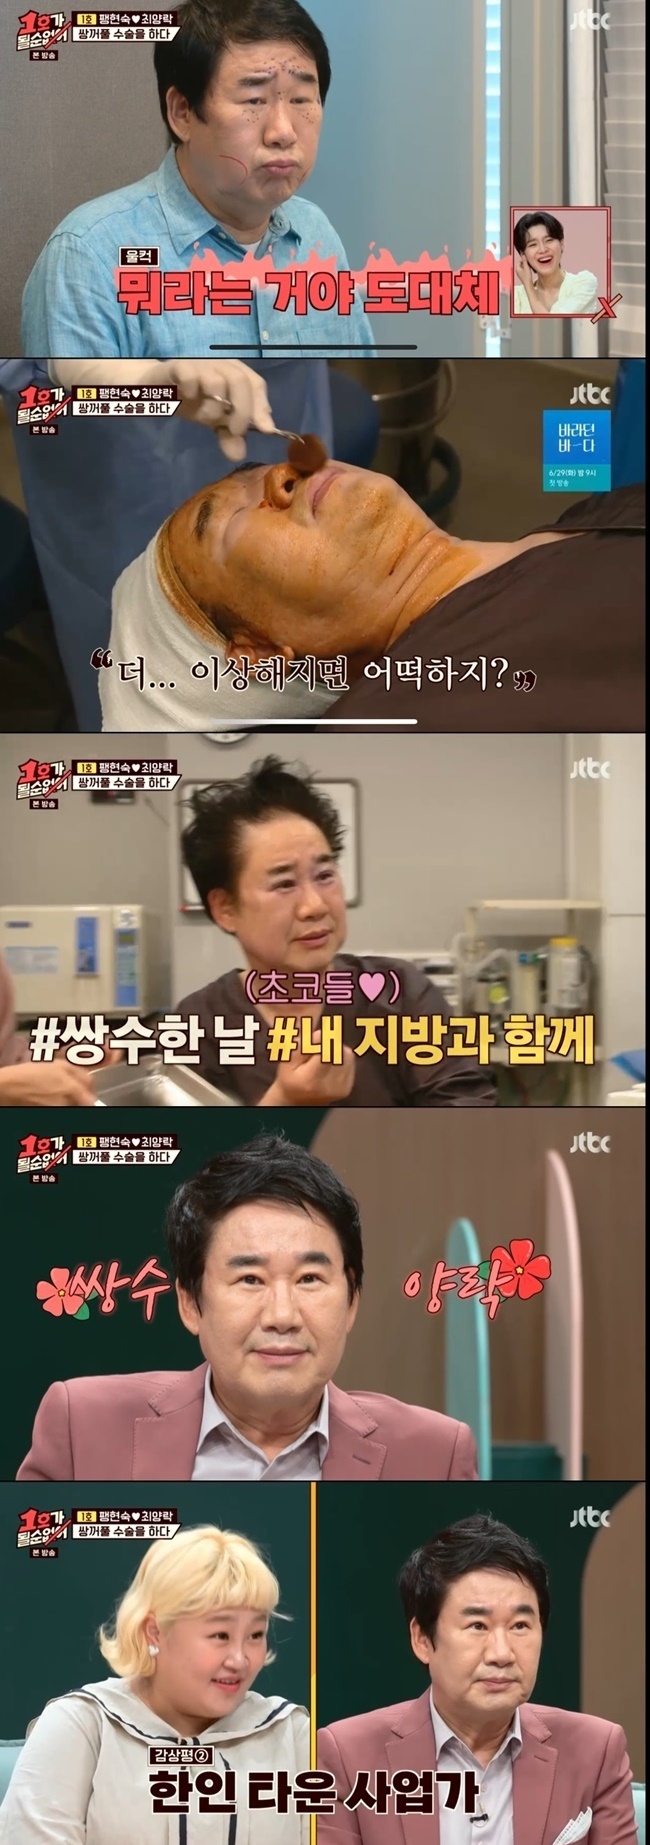 The plastic surgery that was then Bush is now attracting attention as one of the content materials.On July 12, Kim Xiu reported on his current status after his nose and facial contour surgery through his SNS live broadcast.Im feeling a lot better, I think we should watch it for a month or so, but its still 22 days, Kim Xiu said.As for the reason for the Cosmetic Surgery, he said, I was a bucket list because of I am talking around and I am a platoon.I am doing beauty YouTubers, planting jaw surgery and hairlines, and giving you information. Previously, Broadcaster Lee Se-young also publicly declared Cosmetic Surgery last year, followed by YouTube Content, which was delivered through the surgery and later.Lee Se-young said, I did everything I could to do with my eyelid surgery, eye correction, top, back, and bottom. I wanted to continue surgery since I was 20 years old, but I did not have a job.I was a big deal at 32, but I think The Complex has been overcome. As a result, some netizens have been heatedly discussing whether to mold entertainers whenever past photos are released.Because of this appearance, entertainers were more and more hiding whether they were molded, which was soon treated as a shame.However, recently, Cosmetic Surgery has become popular, and many people have not hidden their molding.In particular, Kim Xiu and Lee Se-young are making a series of plastic Choices with their YouTube channel content, from surgery to later treatment and management.It is also changing into a perception that it is no longer a shame.In particular, JTBC I can not be No. 1 broadcast in June, Broadcaster Choi Yang-Rak collected topics from double eyelid surgery consultation, surgery process and postoperative appearance.At the time, Choi Yang-Rak went on studio shooting 10 days after double eyelid surgery, and unveiled his current condition by taking off his sunglasses.This change has made the public confident in their appearance due to plastic surgery and found happiness of self-satisfaction.Of course, I agree with the fact that I should not find my happiness because of my appearance, but I can not overlook the impact of my appearance on my life.However, there is a negative view that it encourages molding for this trend.Forming is entirely my Choices, but it encourages appearance groundism in society to do such Choices.There are also problems that may arise as minors frequently encounter plastic surgery content, and even if they promote it as a relatively simple and common operation, side effects can always be followed.In addition, the molding content released on the air or YouTube is aimed at entertainers and YouTubers who have received many peoples spotlights, so it is difficult to put non-entertainers on the same line.